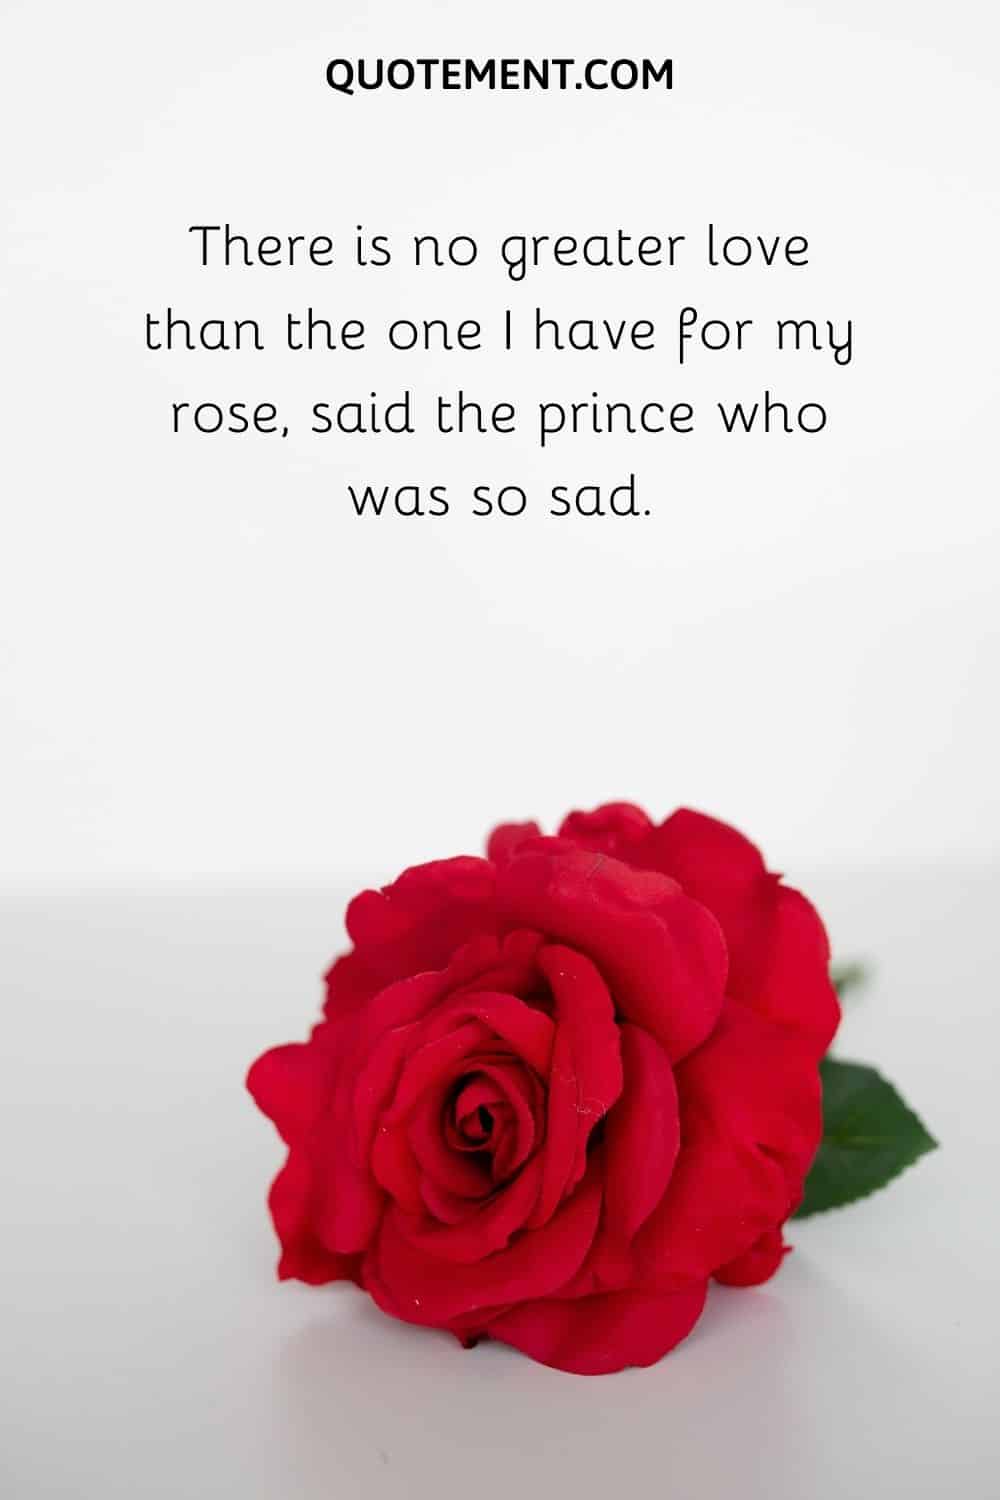 There is no greater love than the one I have for my rose, said the prince who was so sad.